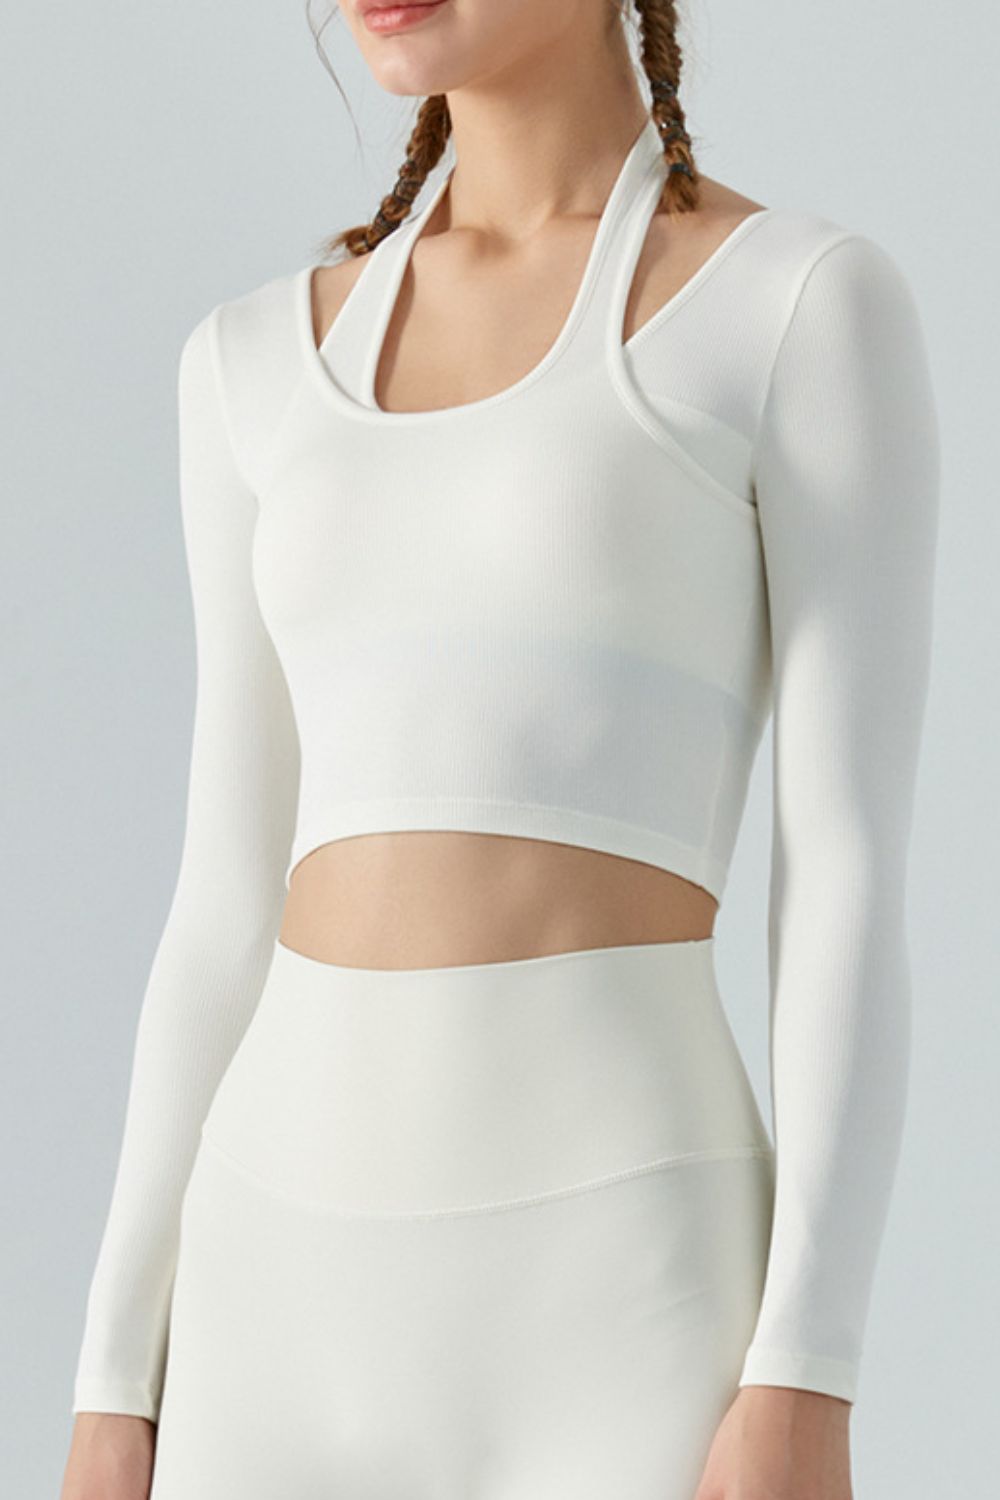 Halter Neck Long Sleeve Cropped Sports Top - White / S